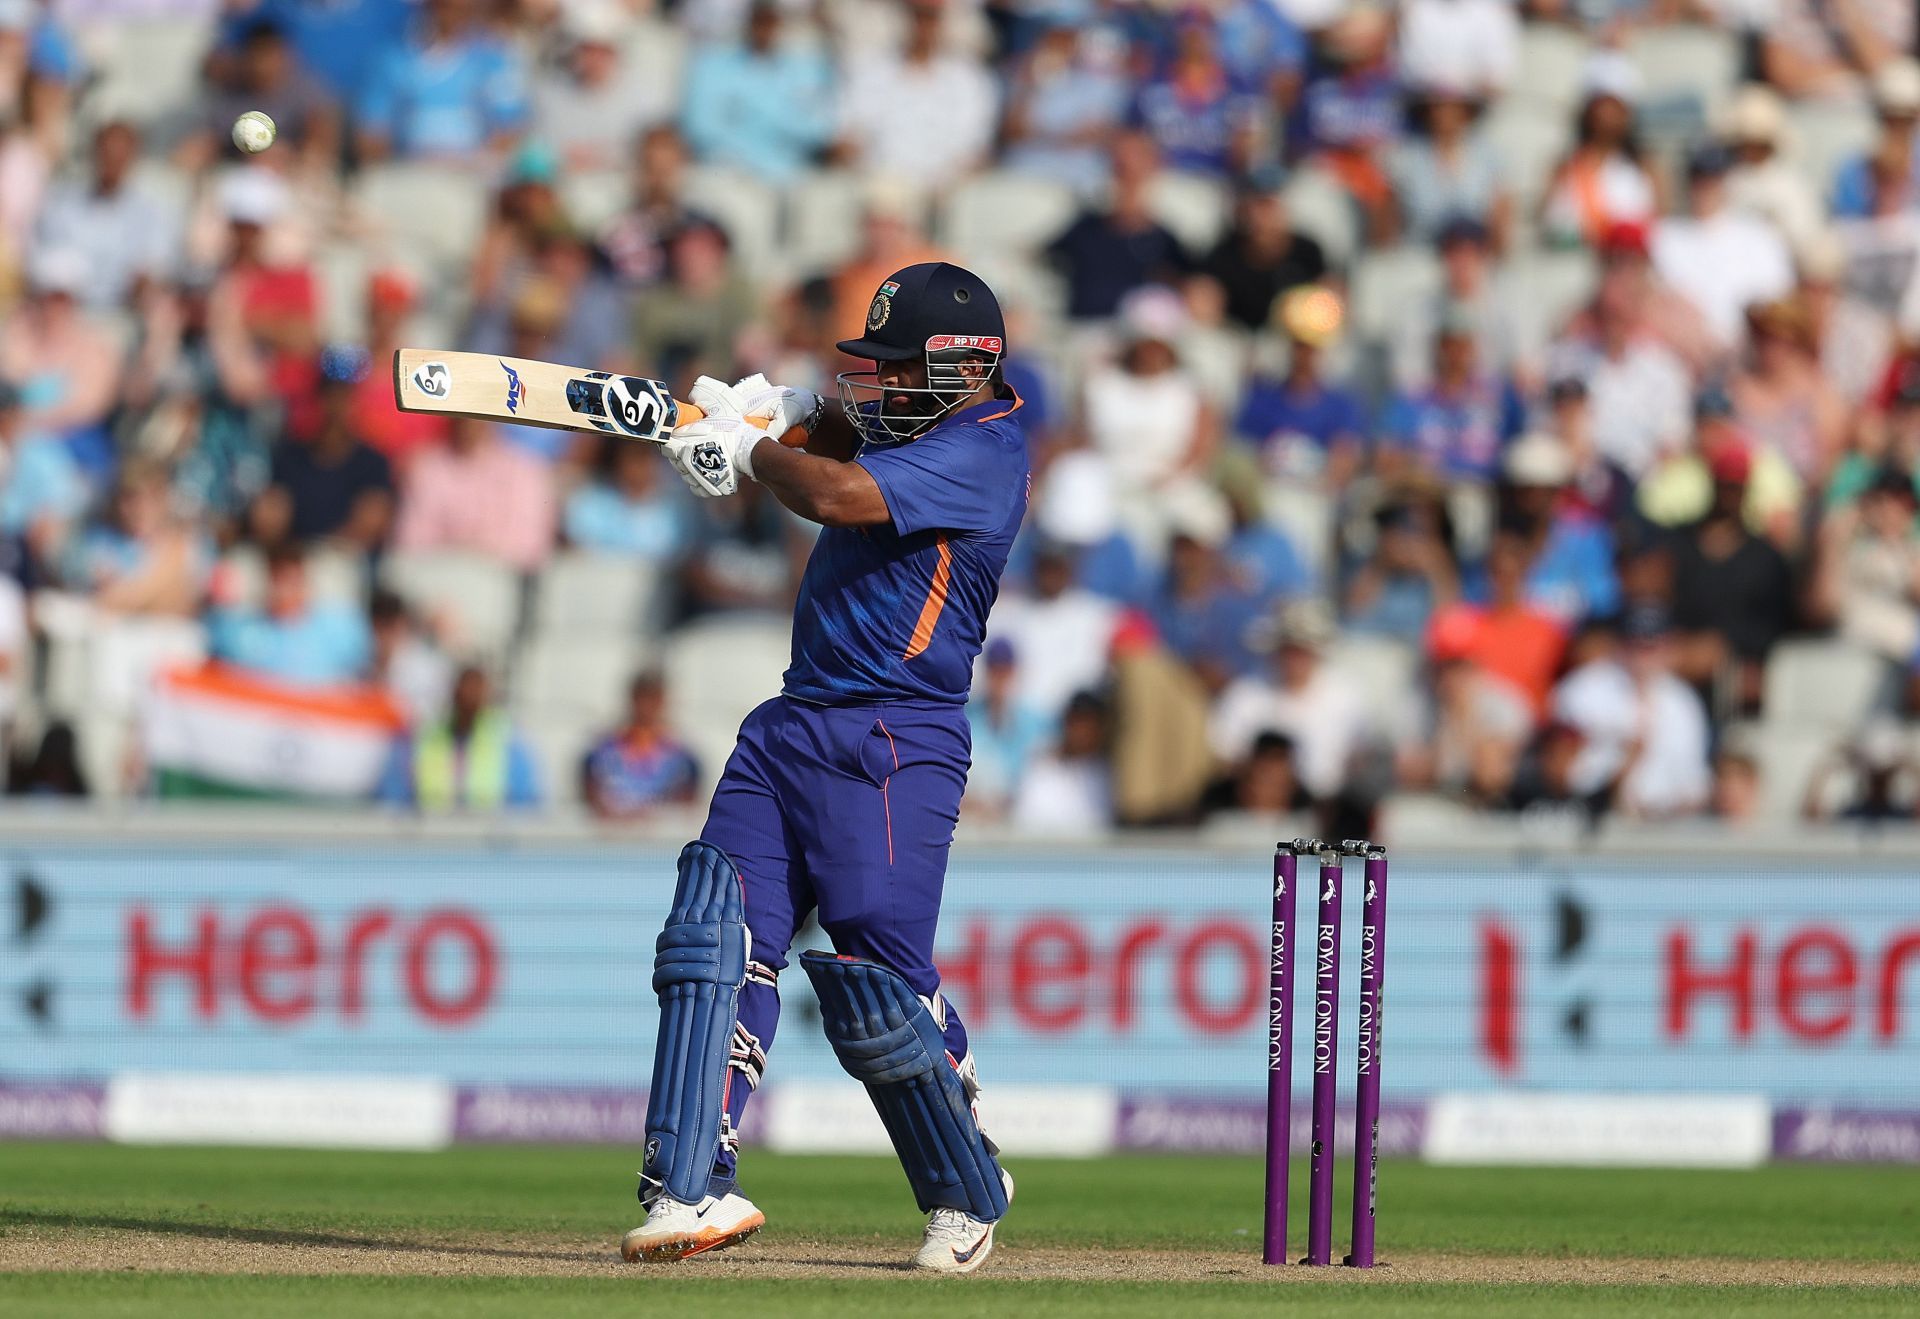 Rishabh Pant batting during the 3rd ODI against England. Pic: Getty Images